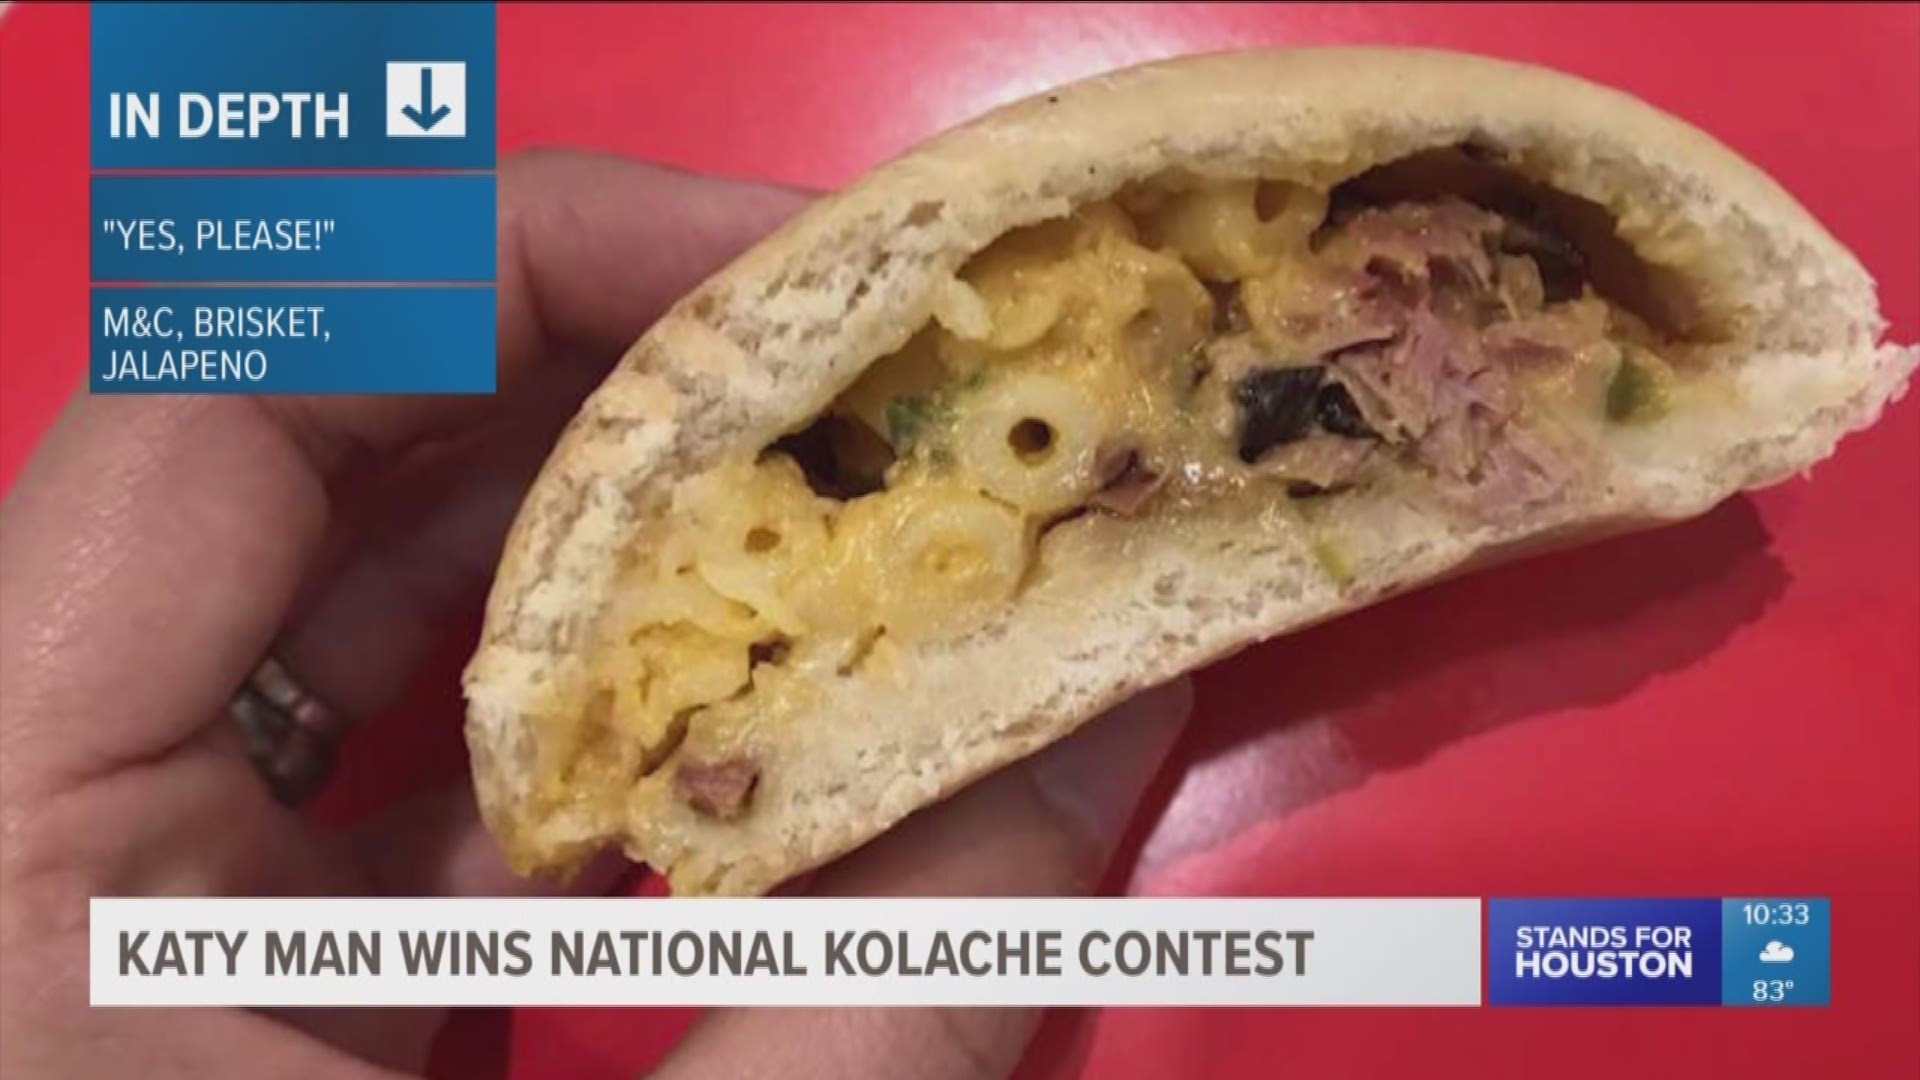 Texans love kolaches so it makes sense that a father from Katy won a national contest for creating a new kolache.